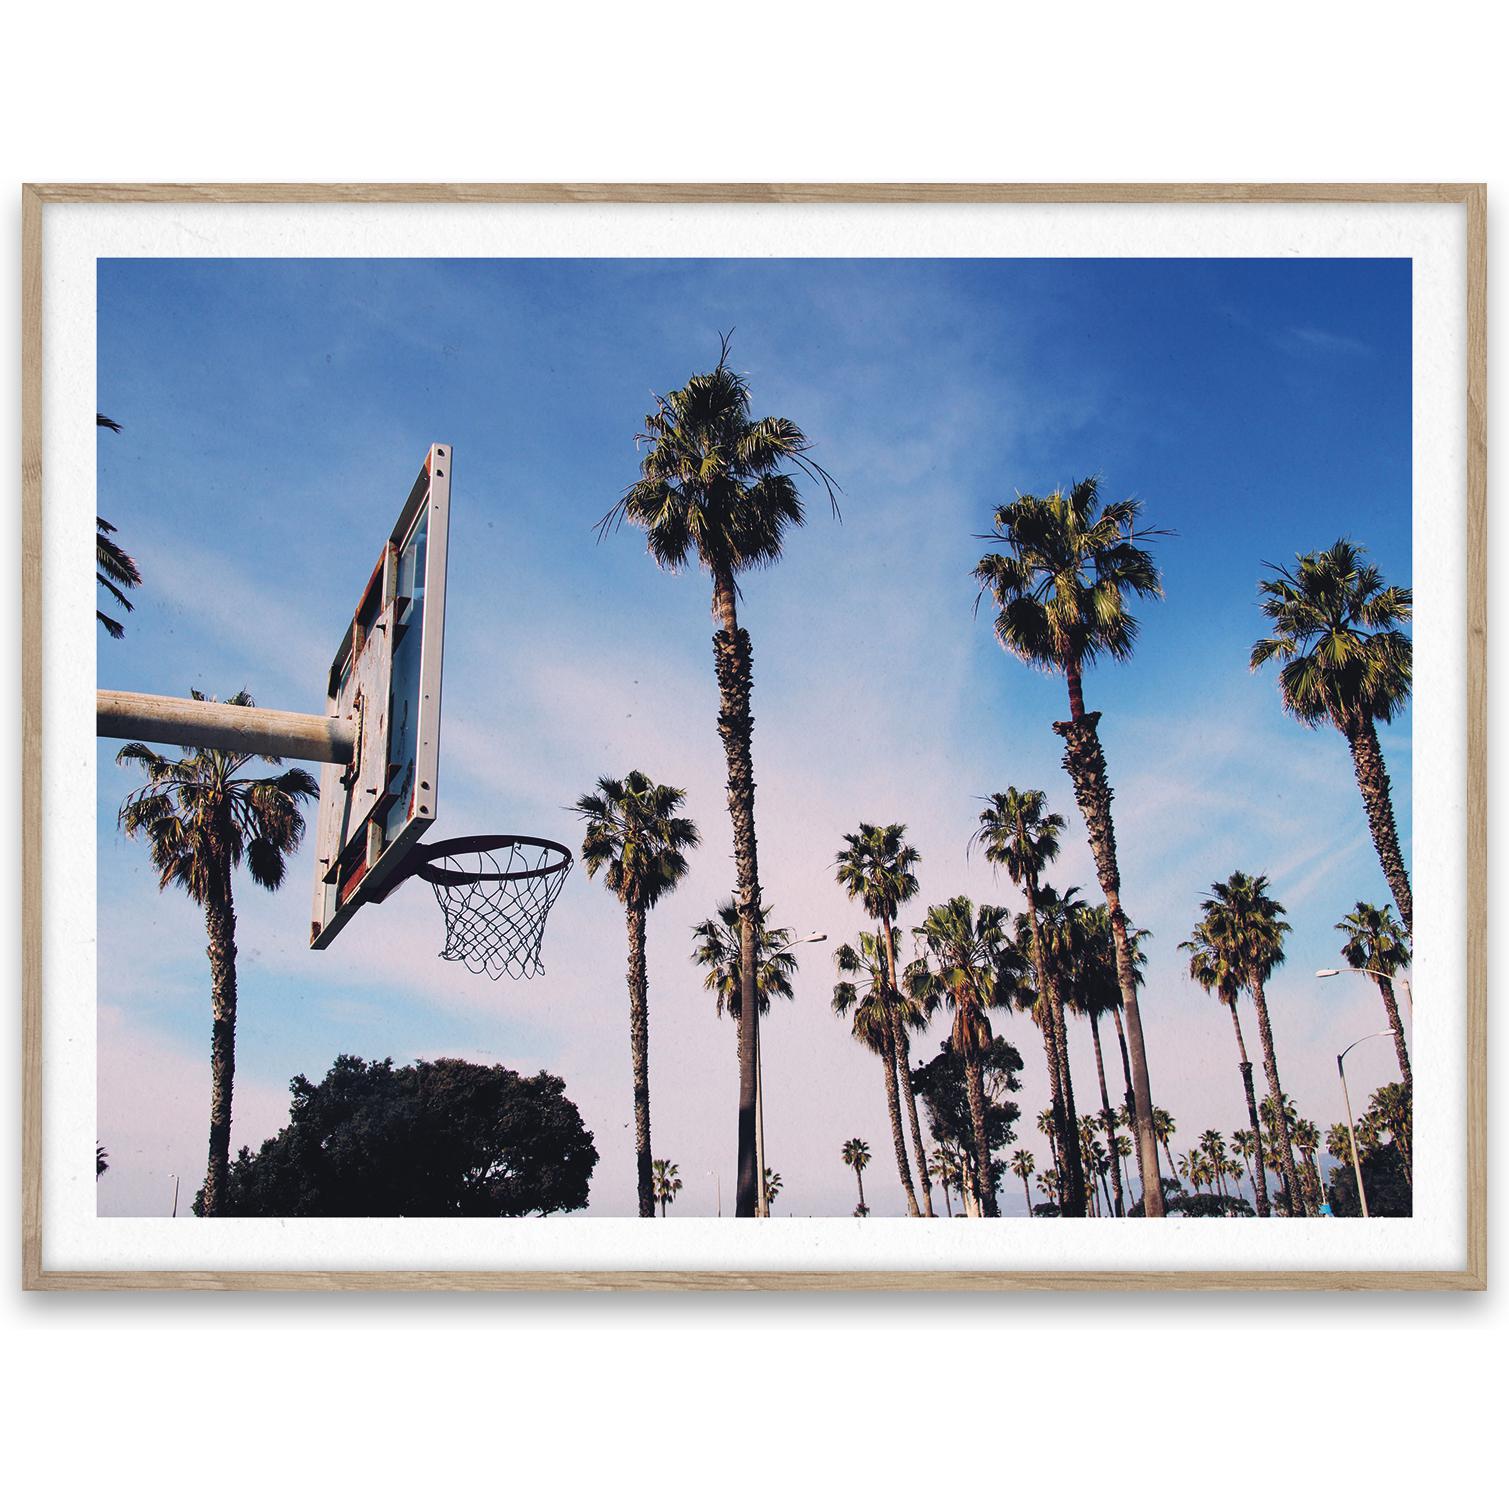 Paper Collective Cities Of Basketball 02, Los Angeles Poster, 30x40 Cm